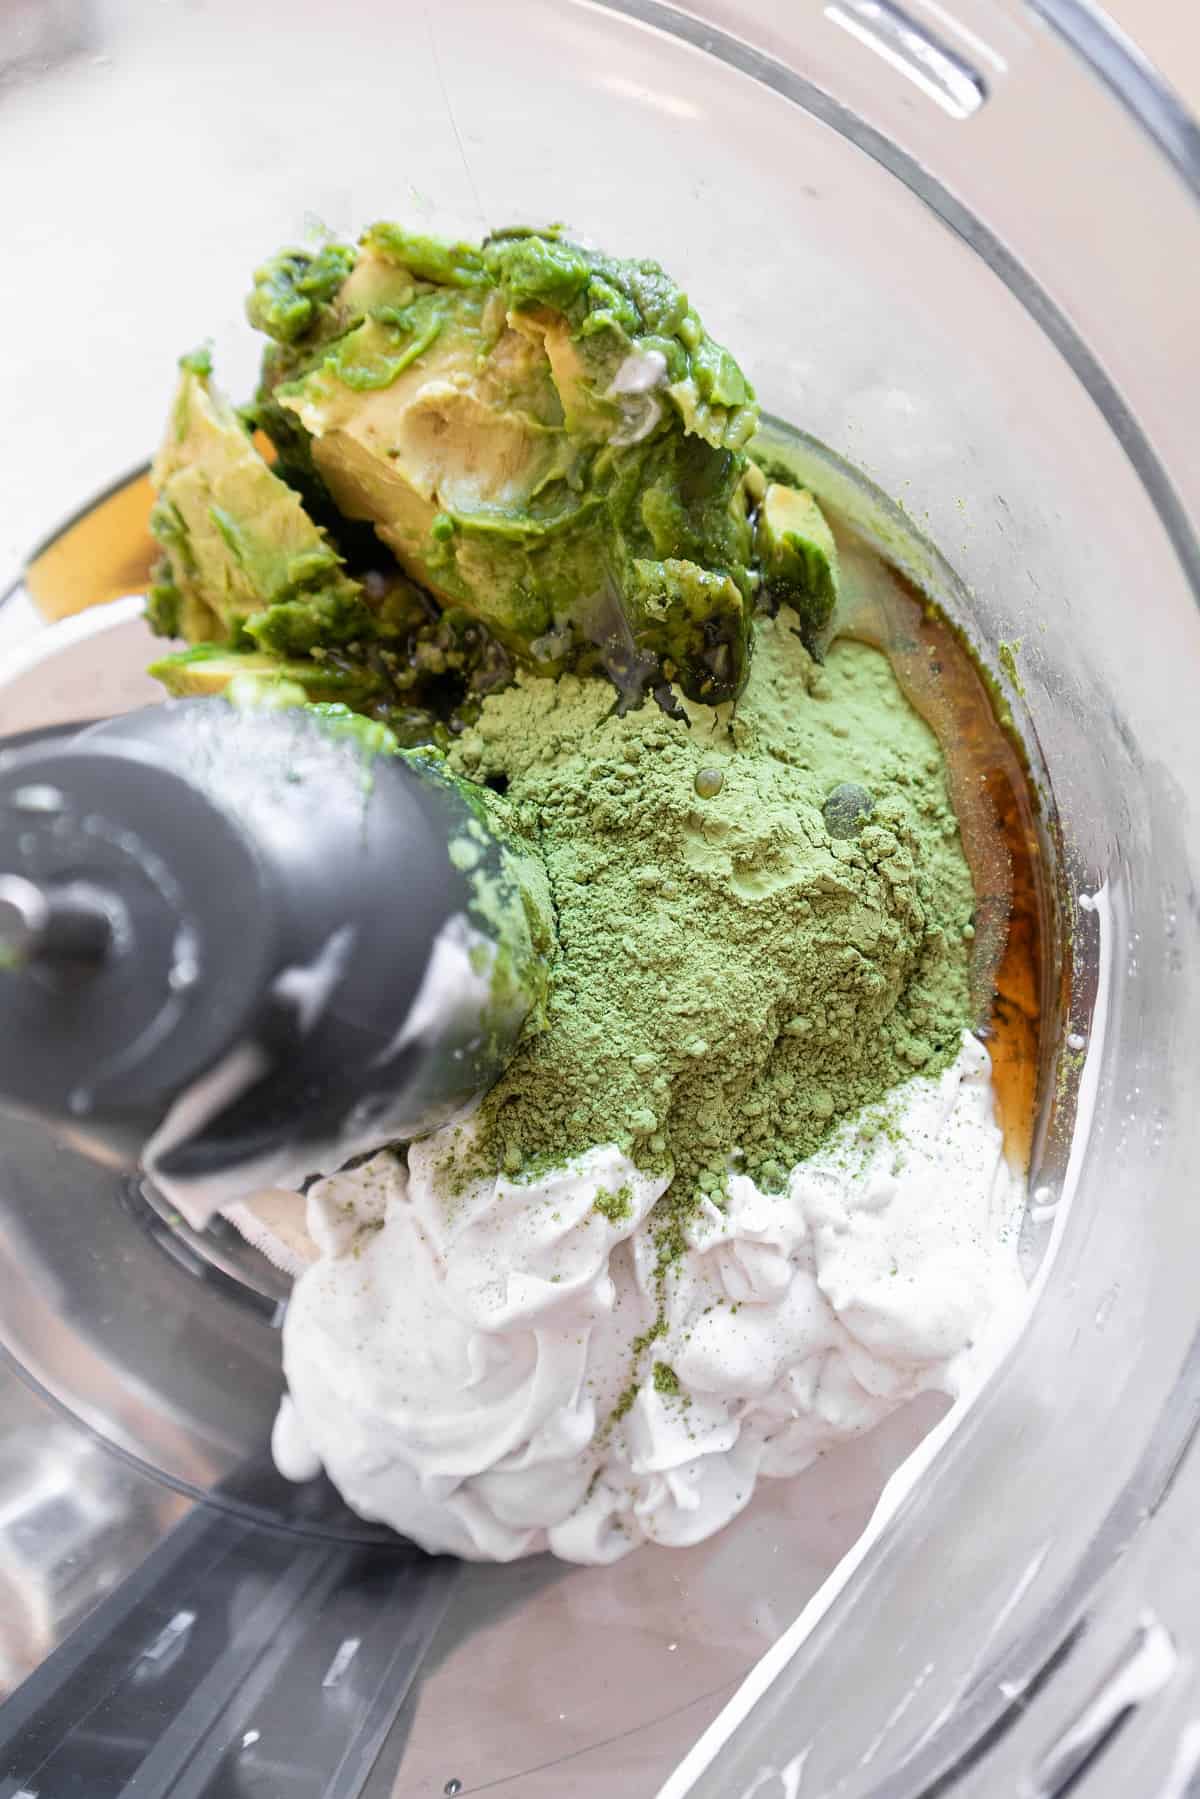 Blend all the ingredients in a food processor